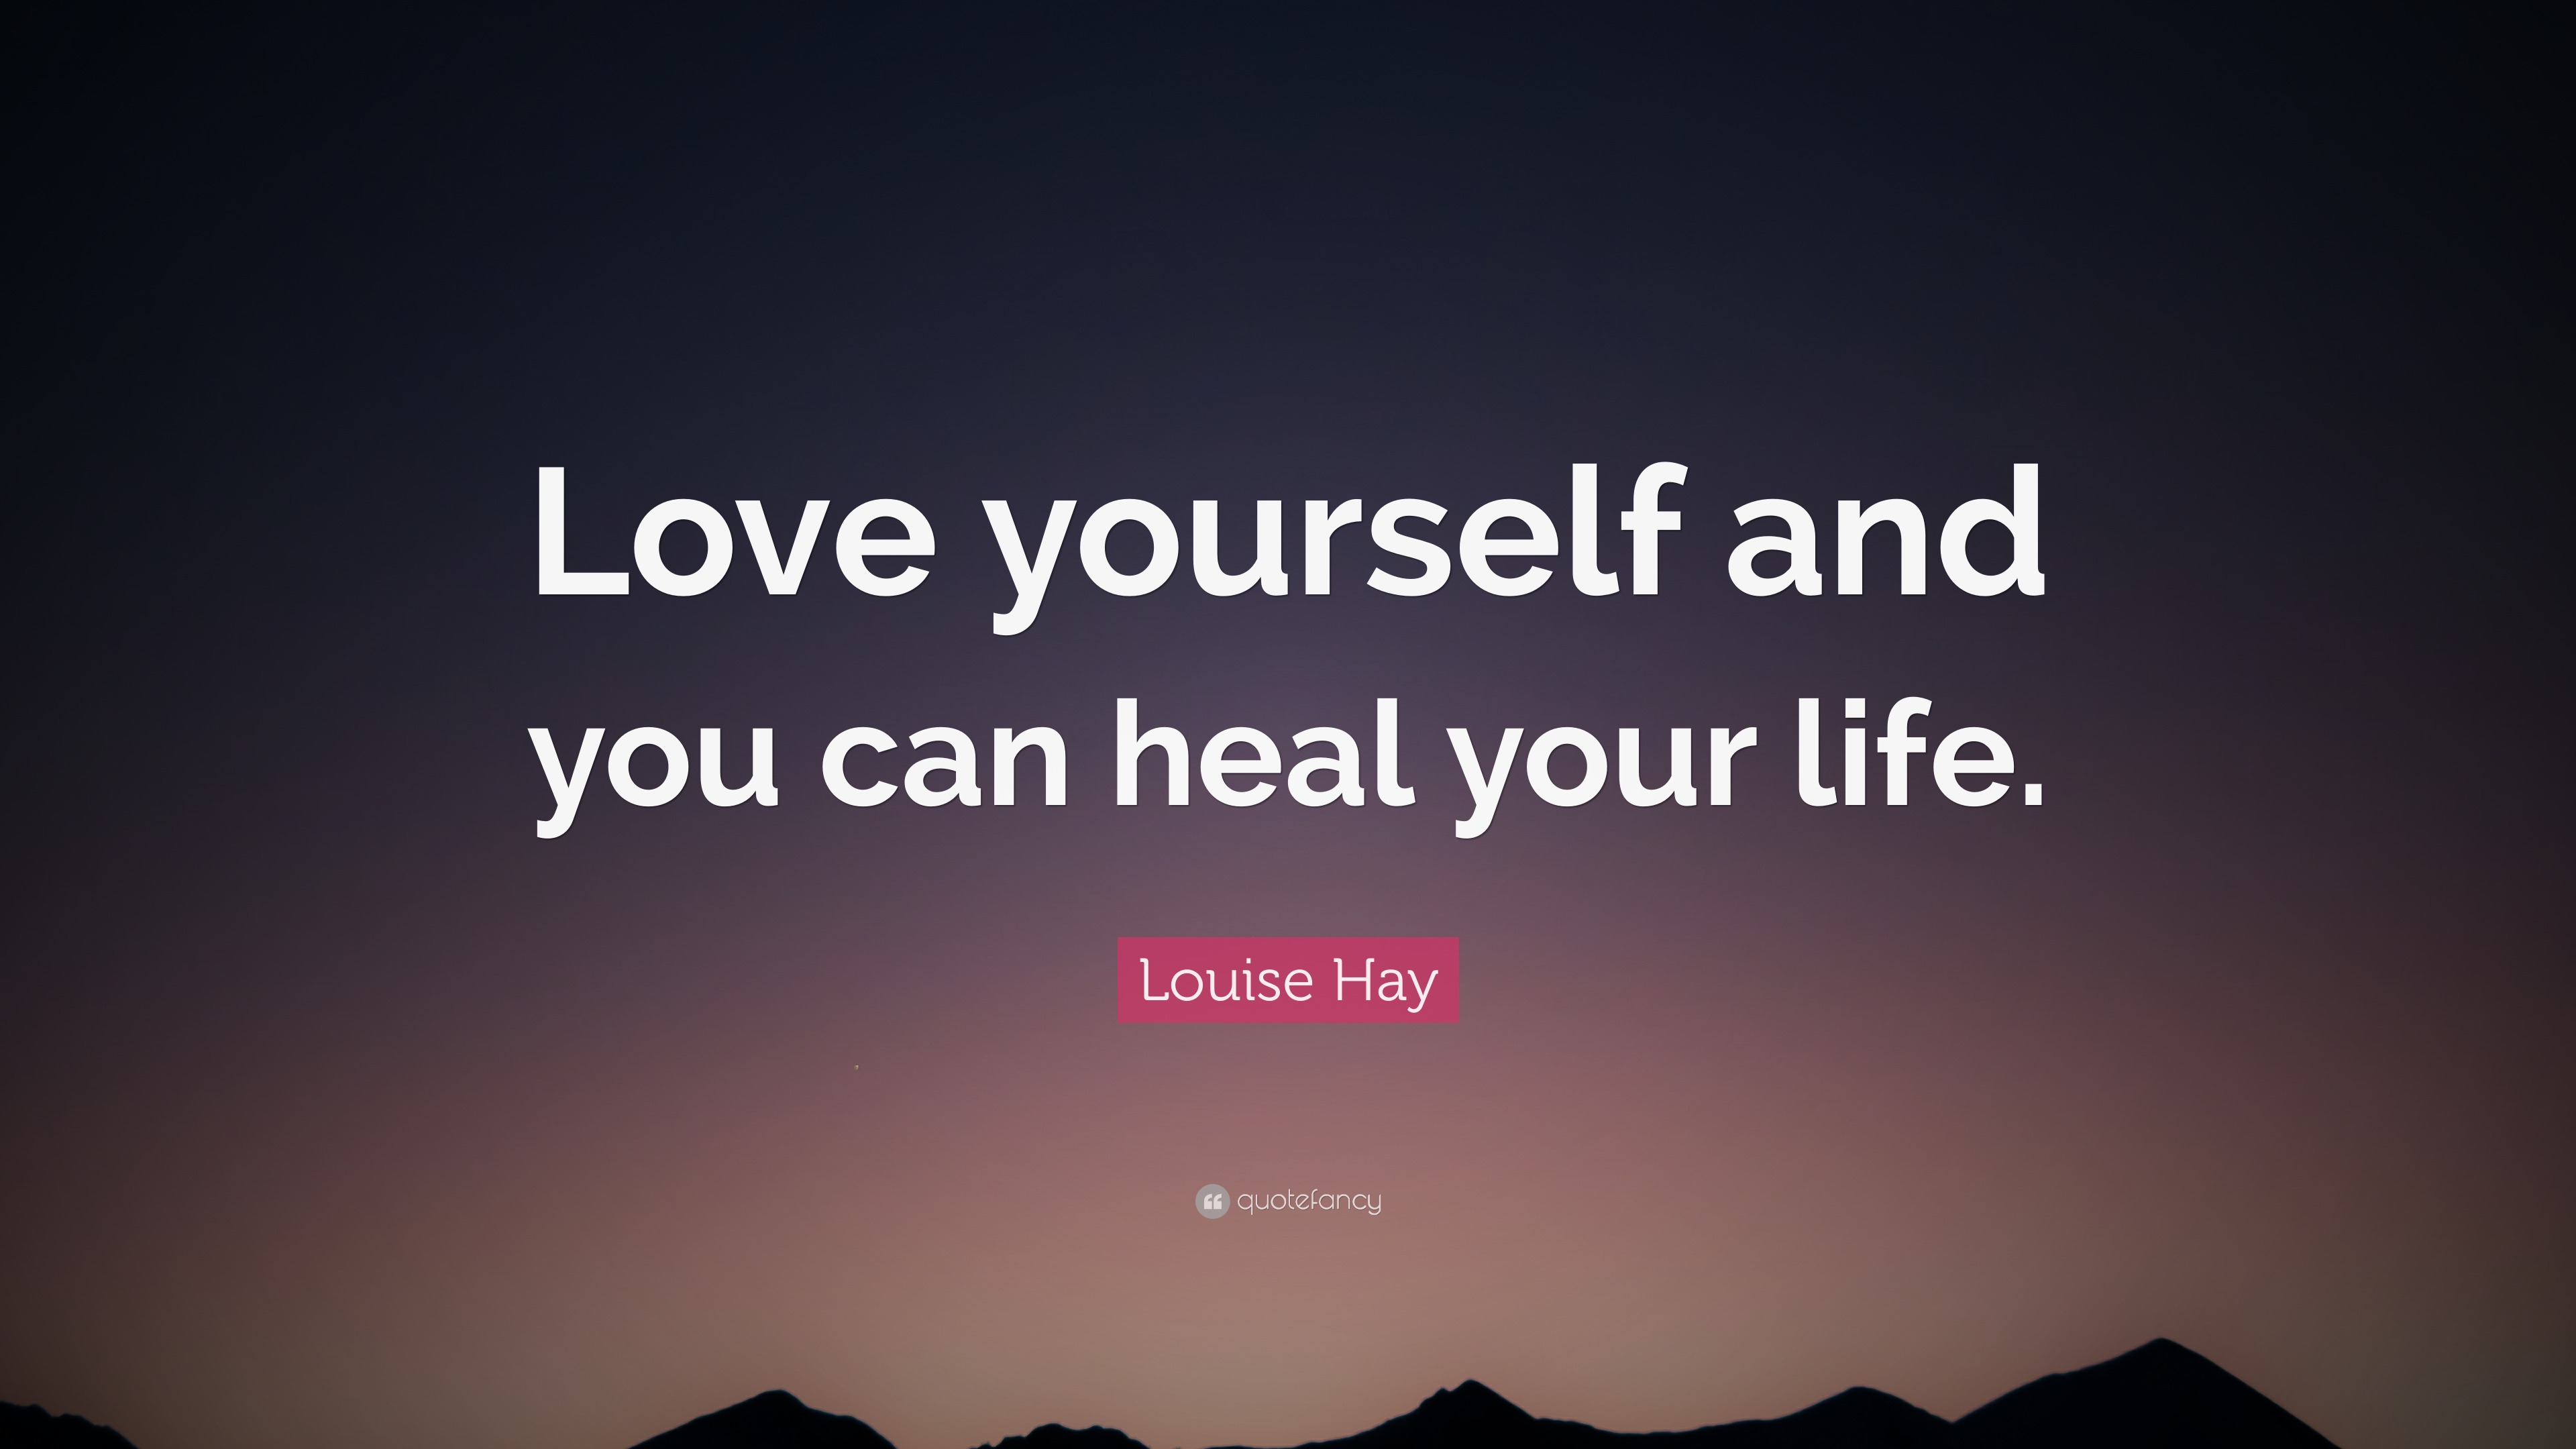 4688327 Louise Hay Quote Love yourself and you can heal your life